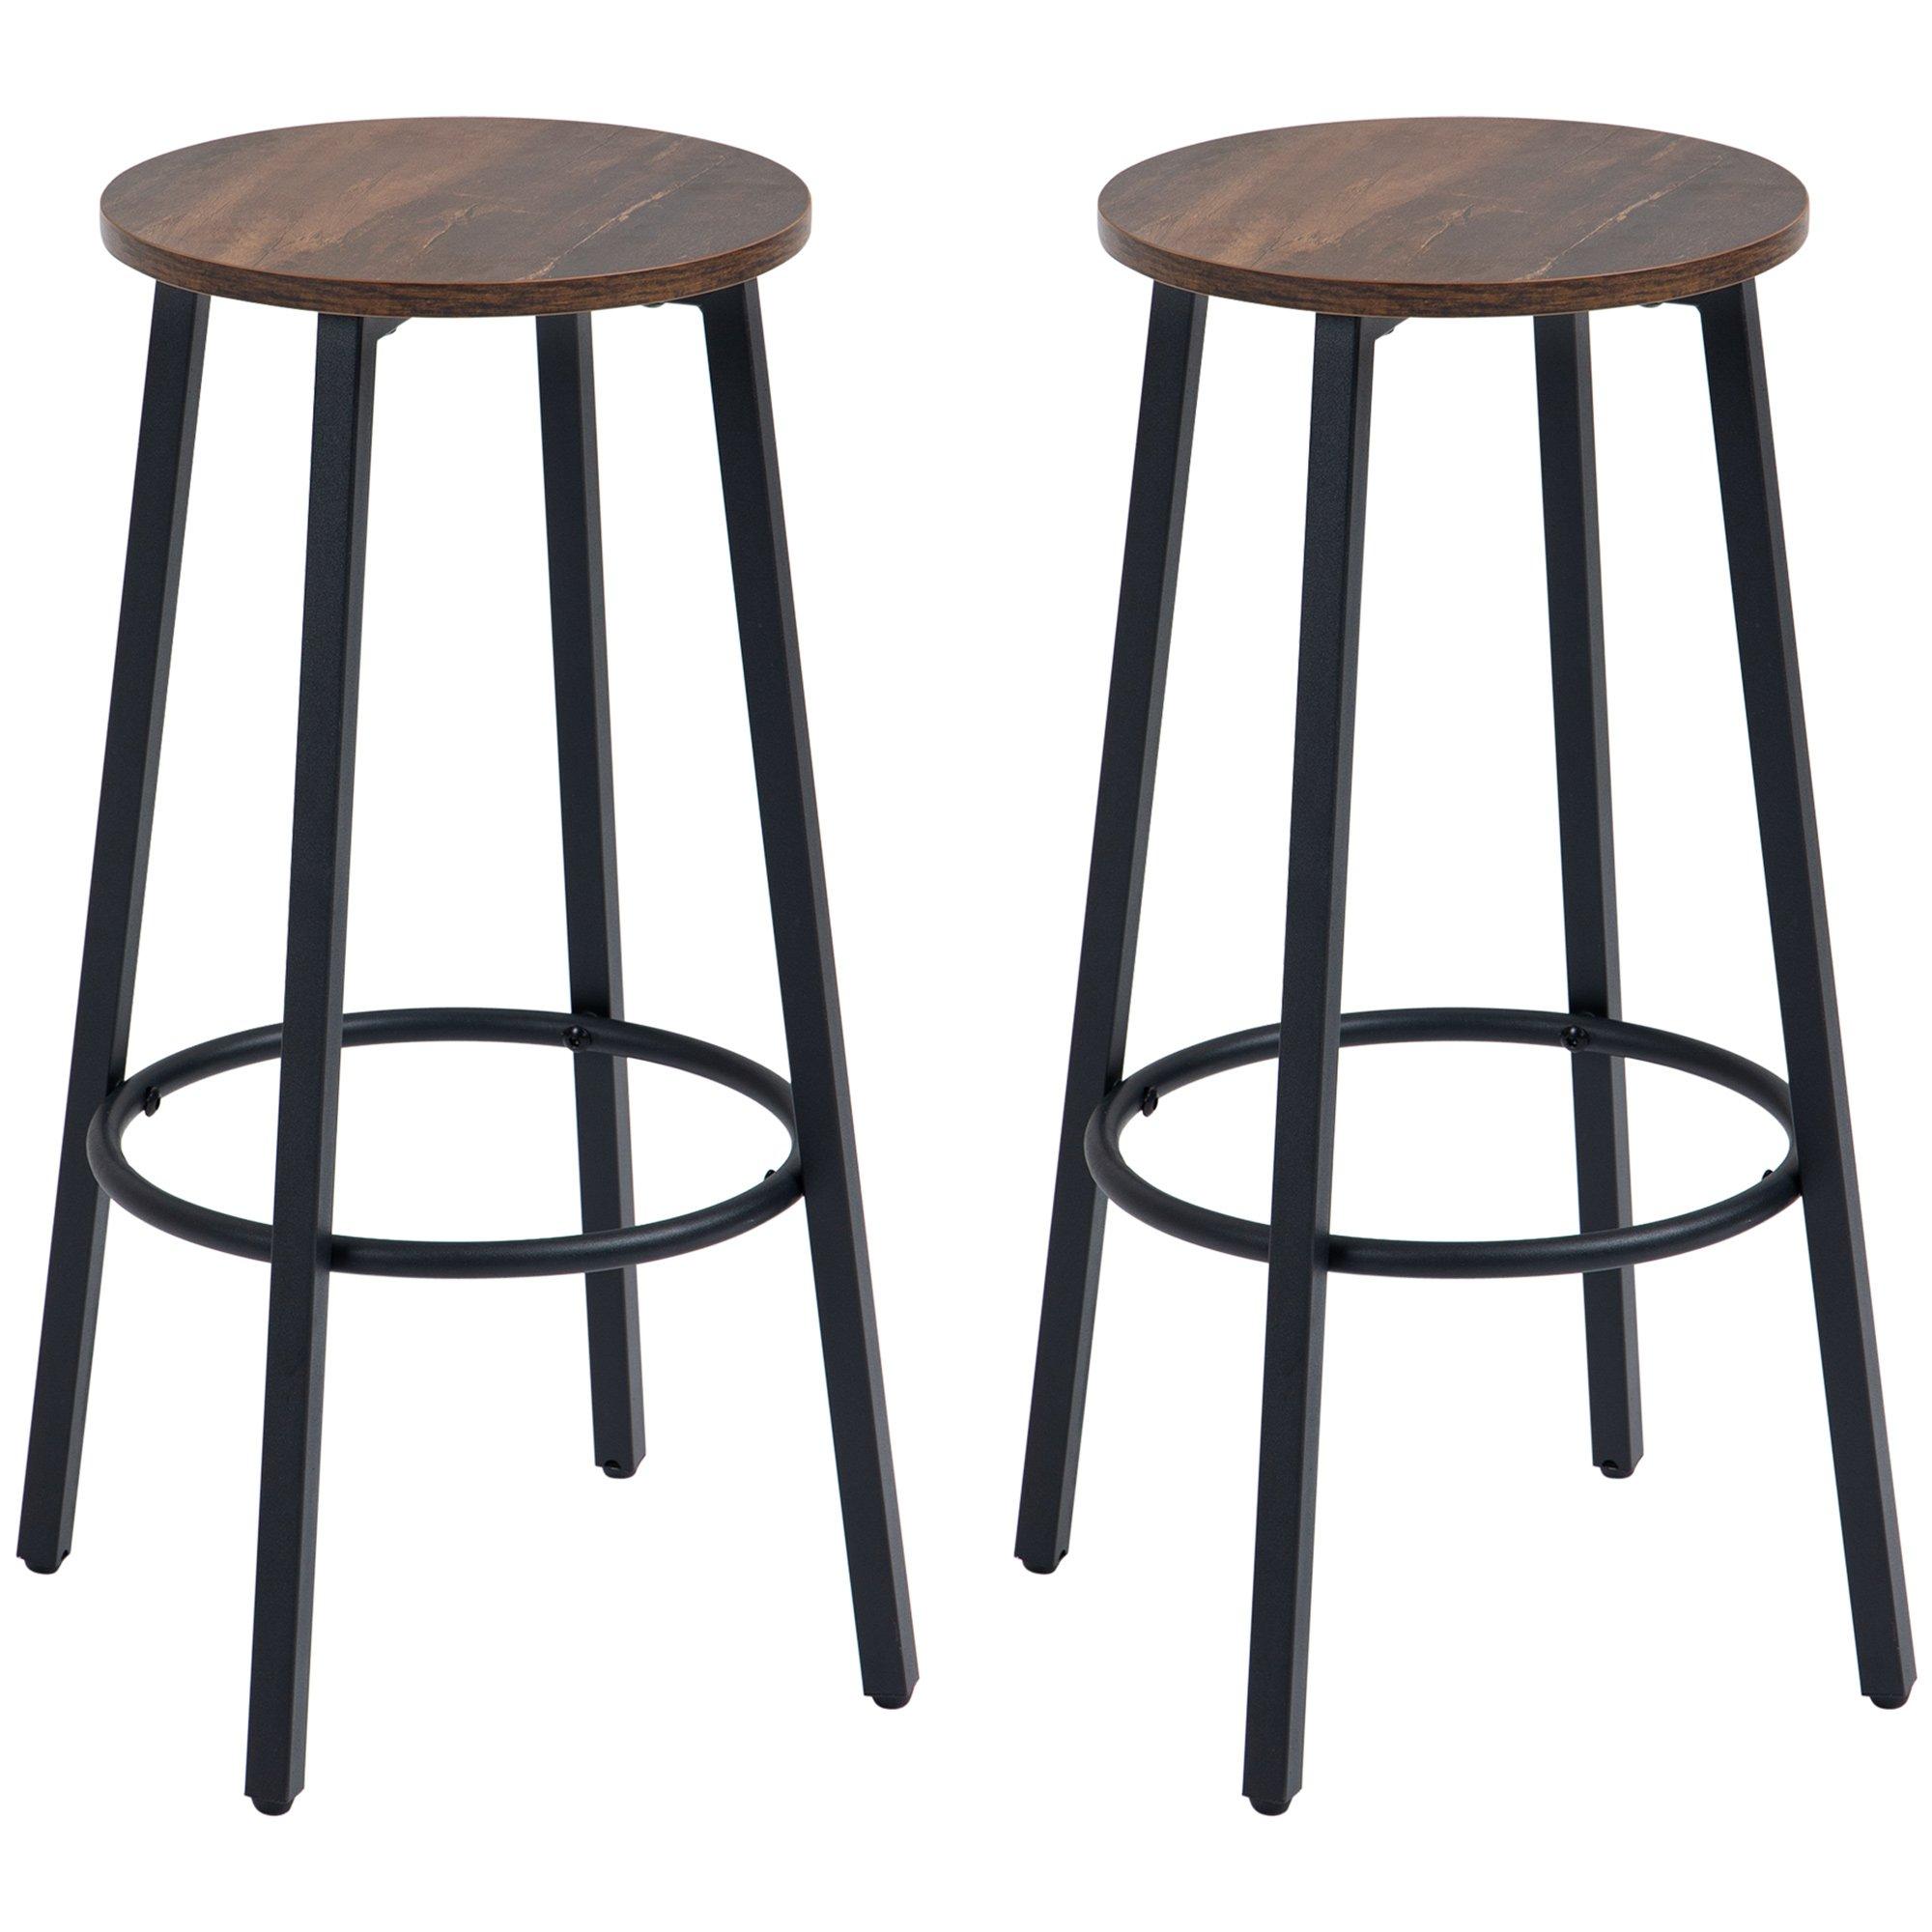 Industrial Bar Stools Set of 2 Breakfast Bar Stools with Footrest